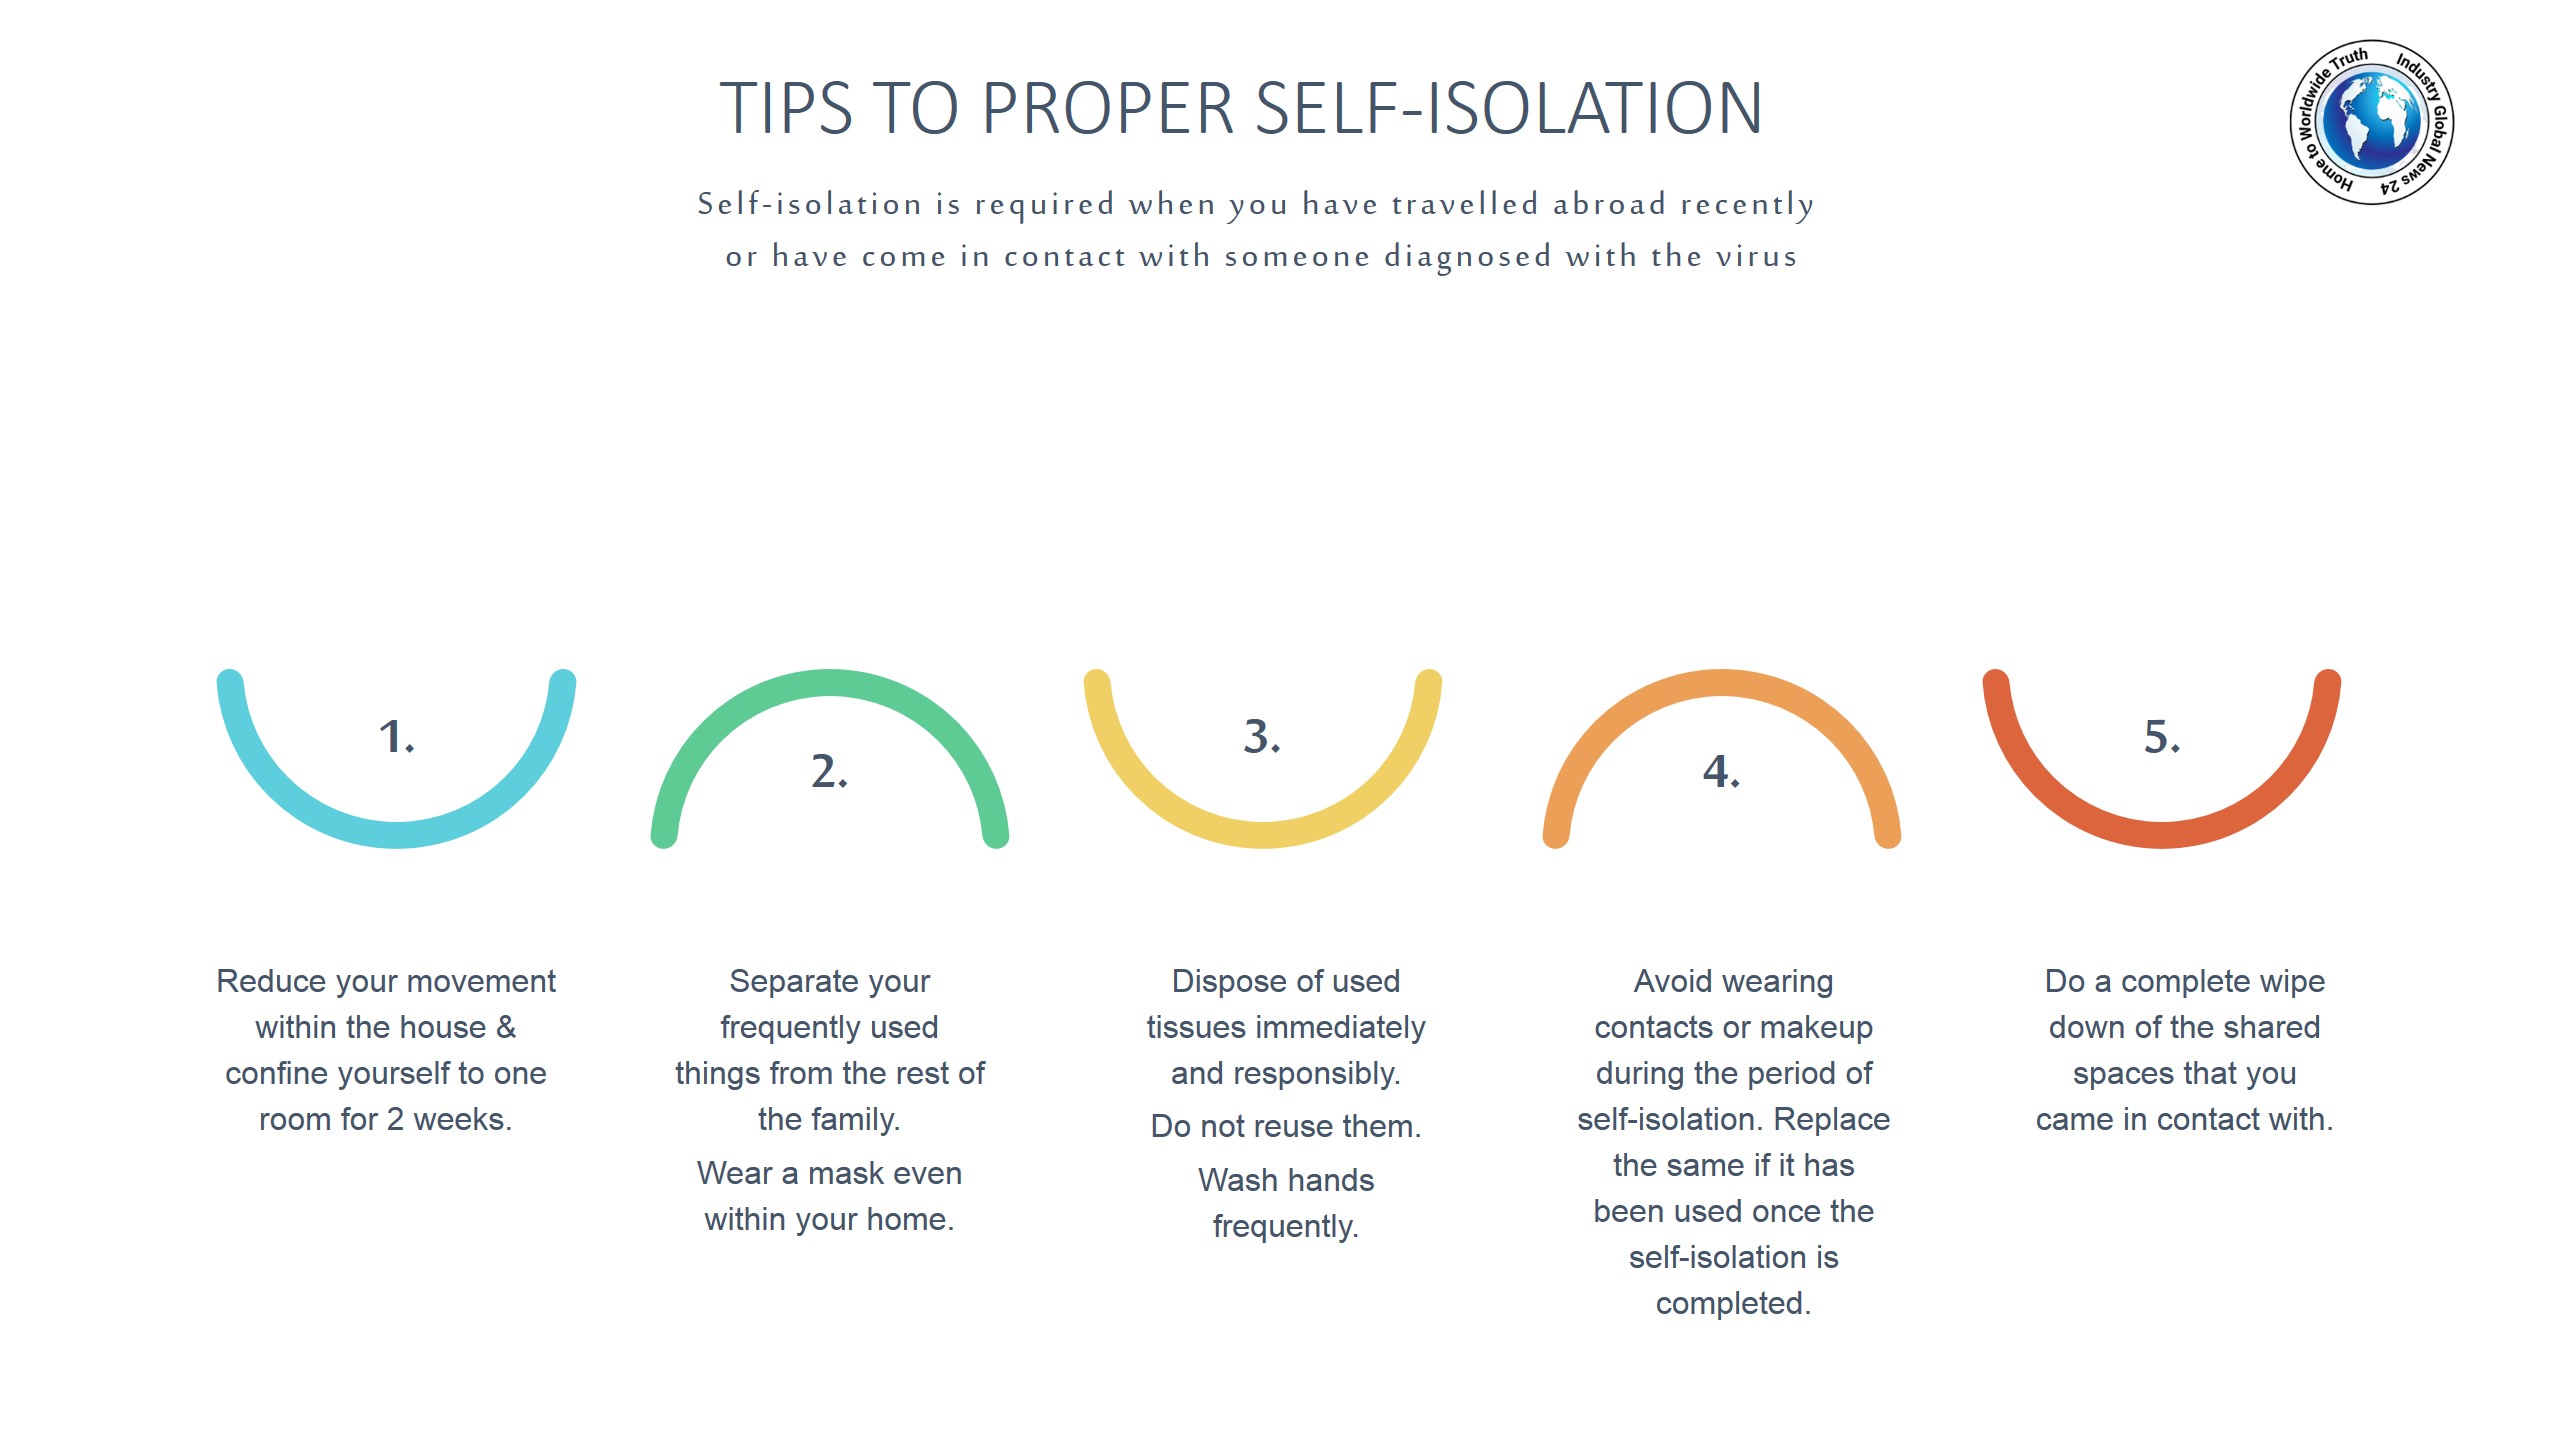 Tips to proper self-isolation